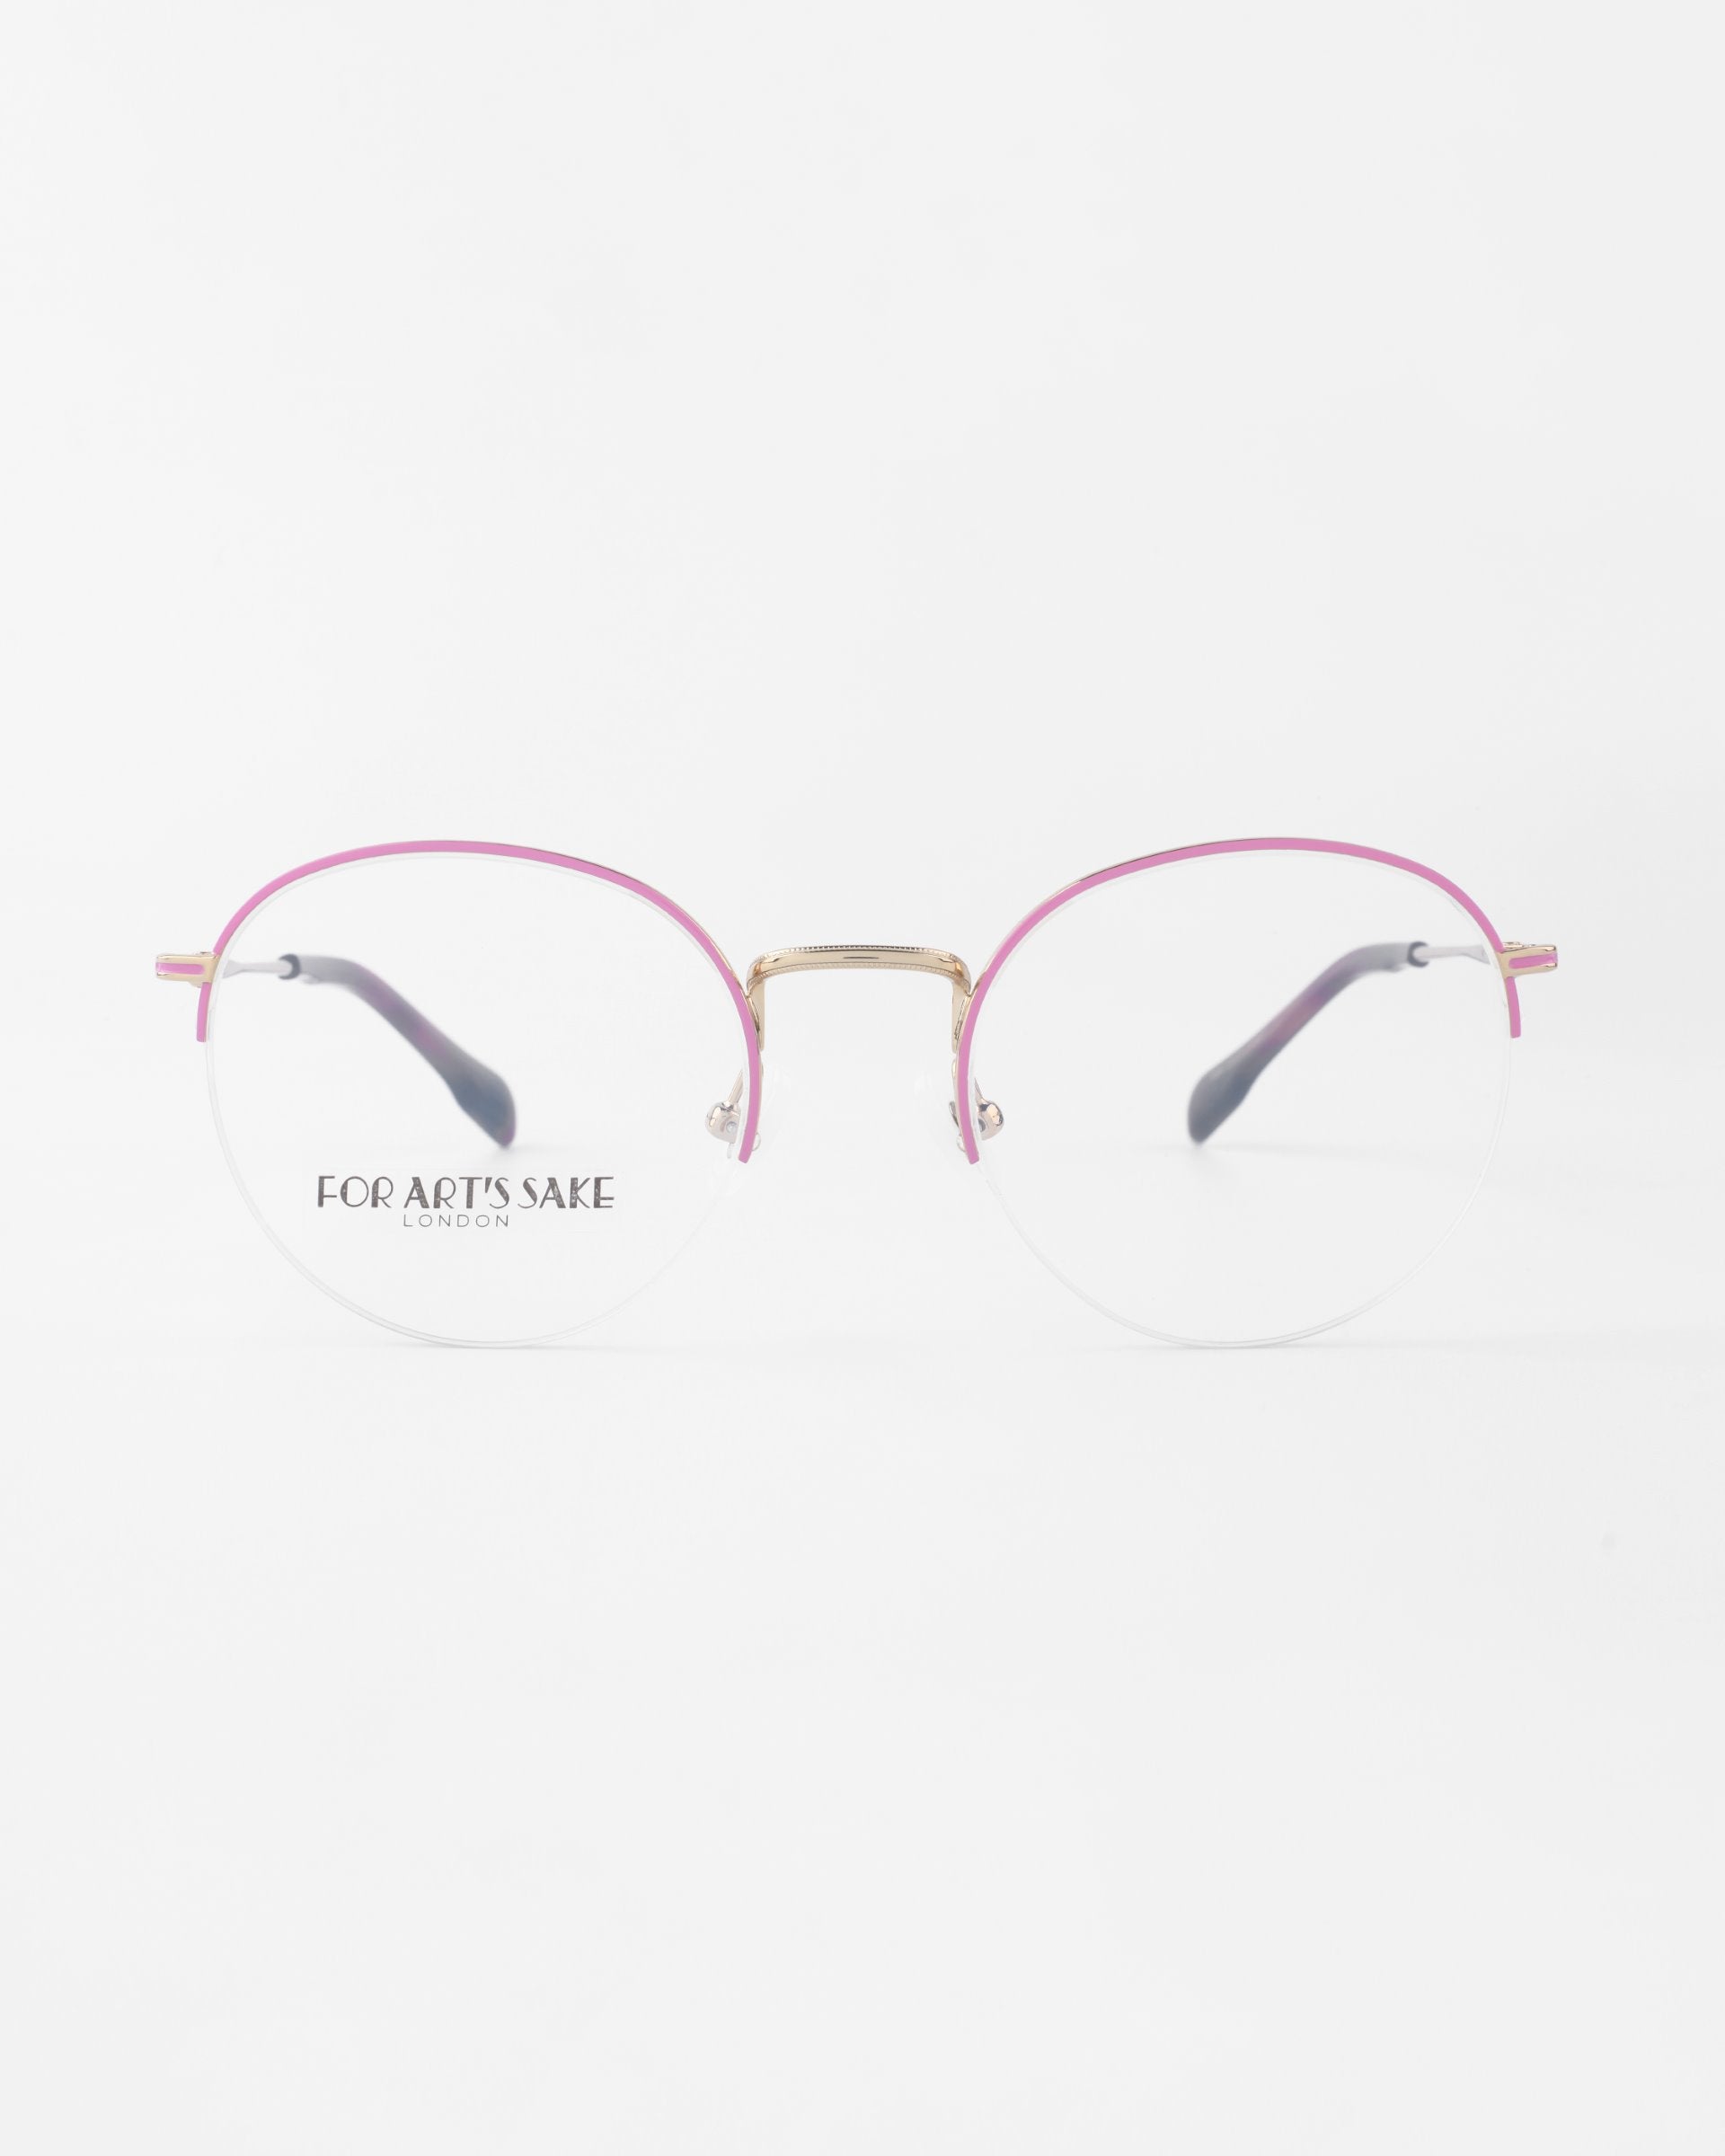 A pair of Ivy reading glasses by For Art's Sake® with a thin gold bridge and pink rims. The earpieces are black with gold accents near the hinges. Featuring blue light filter lenses, the words "For Art's Sake® London" are printed on the left lens. The background is plain white.